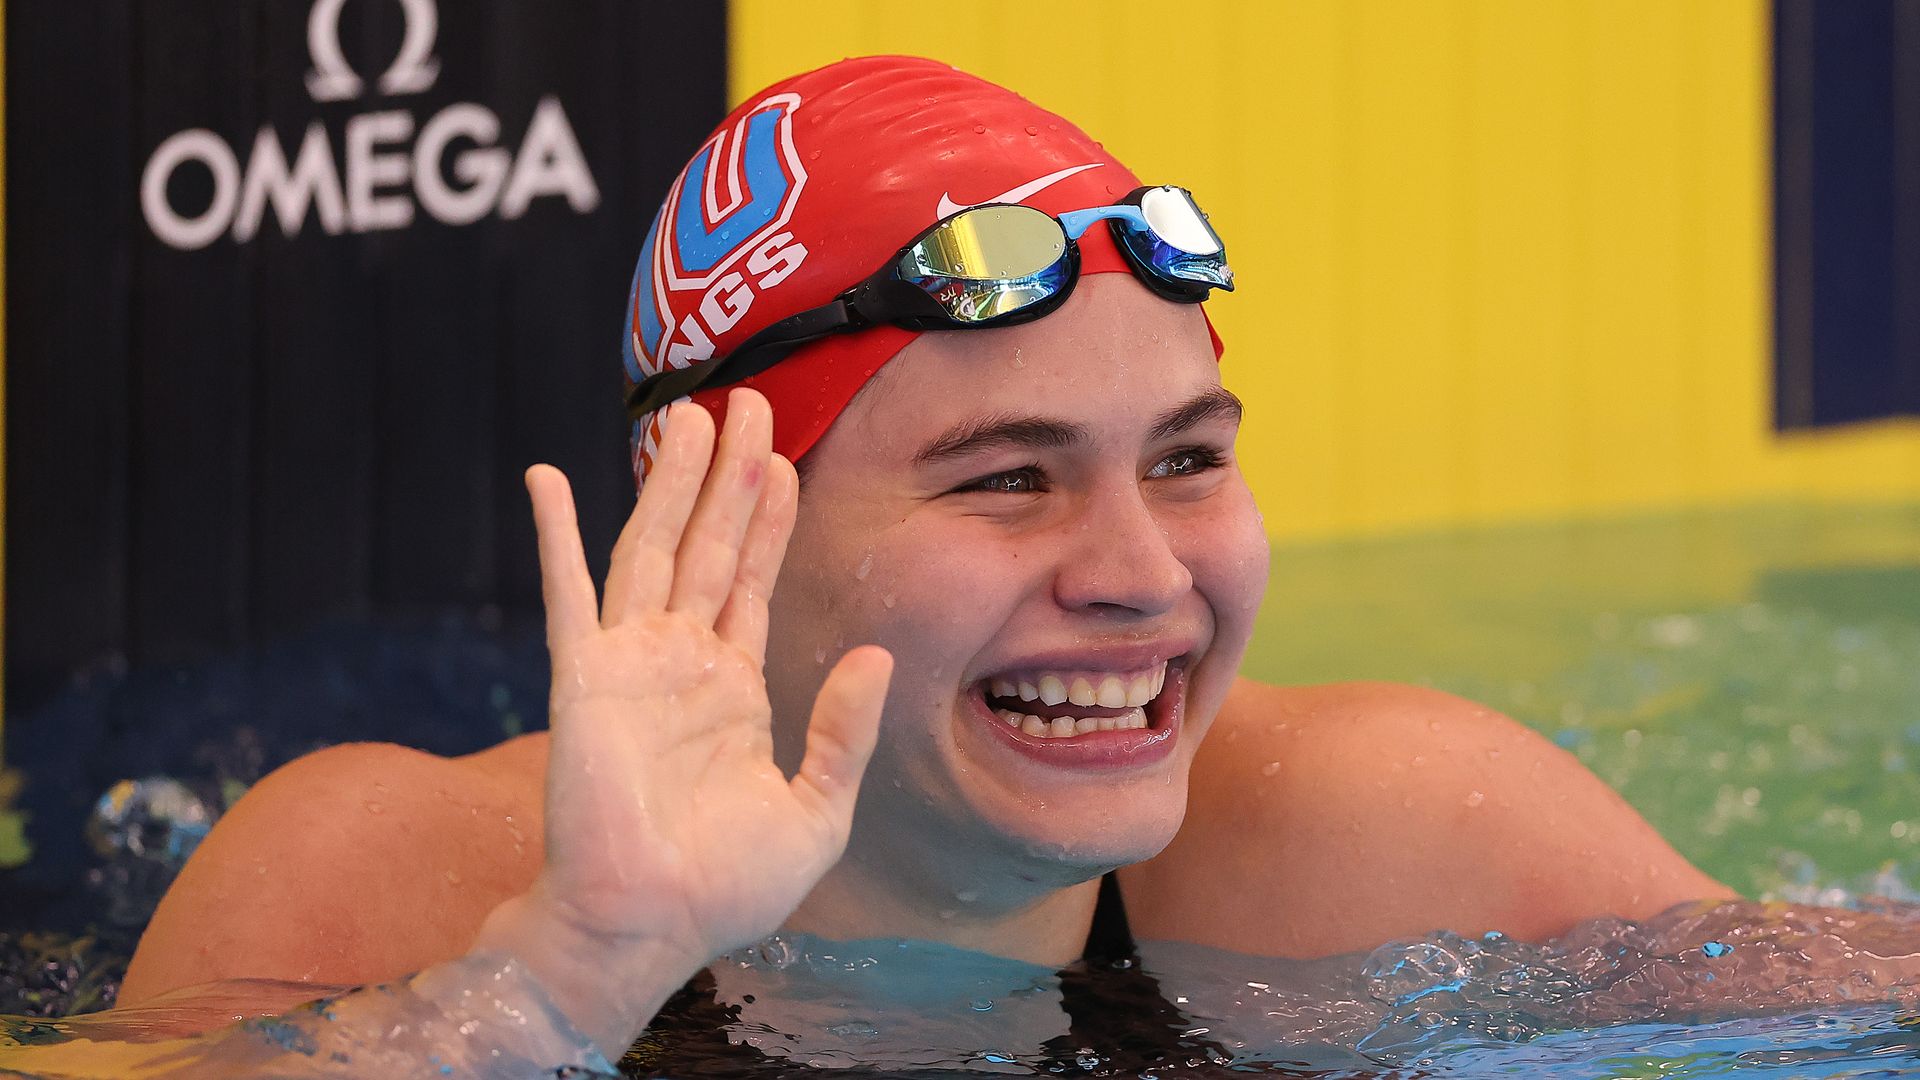 Paraguayan swimmer Luana Alonso qualifies for the Paris Games and wins the internet's heart